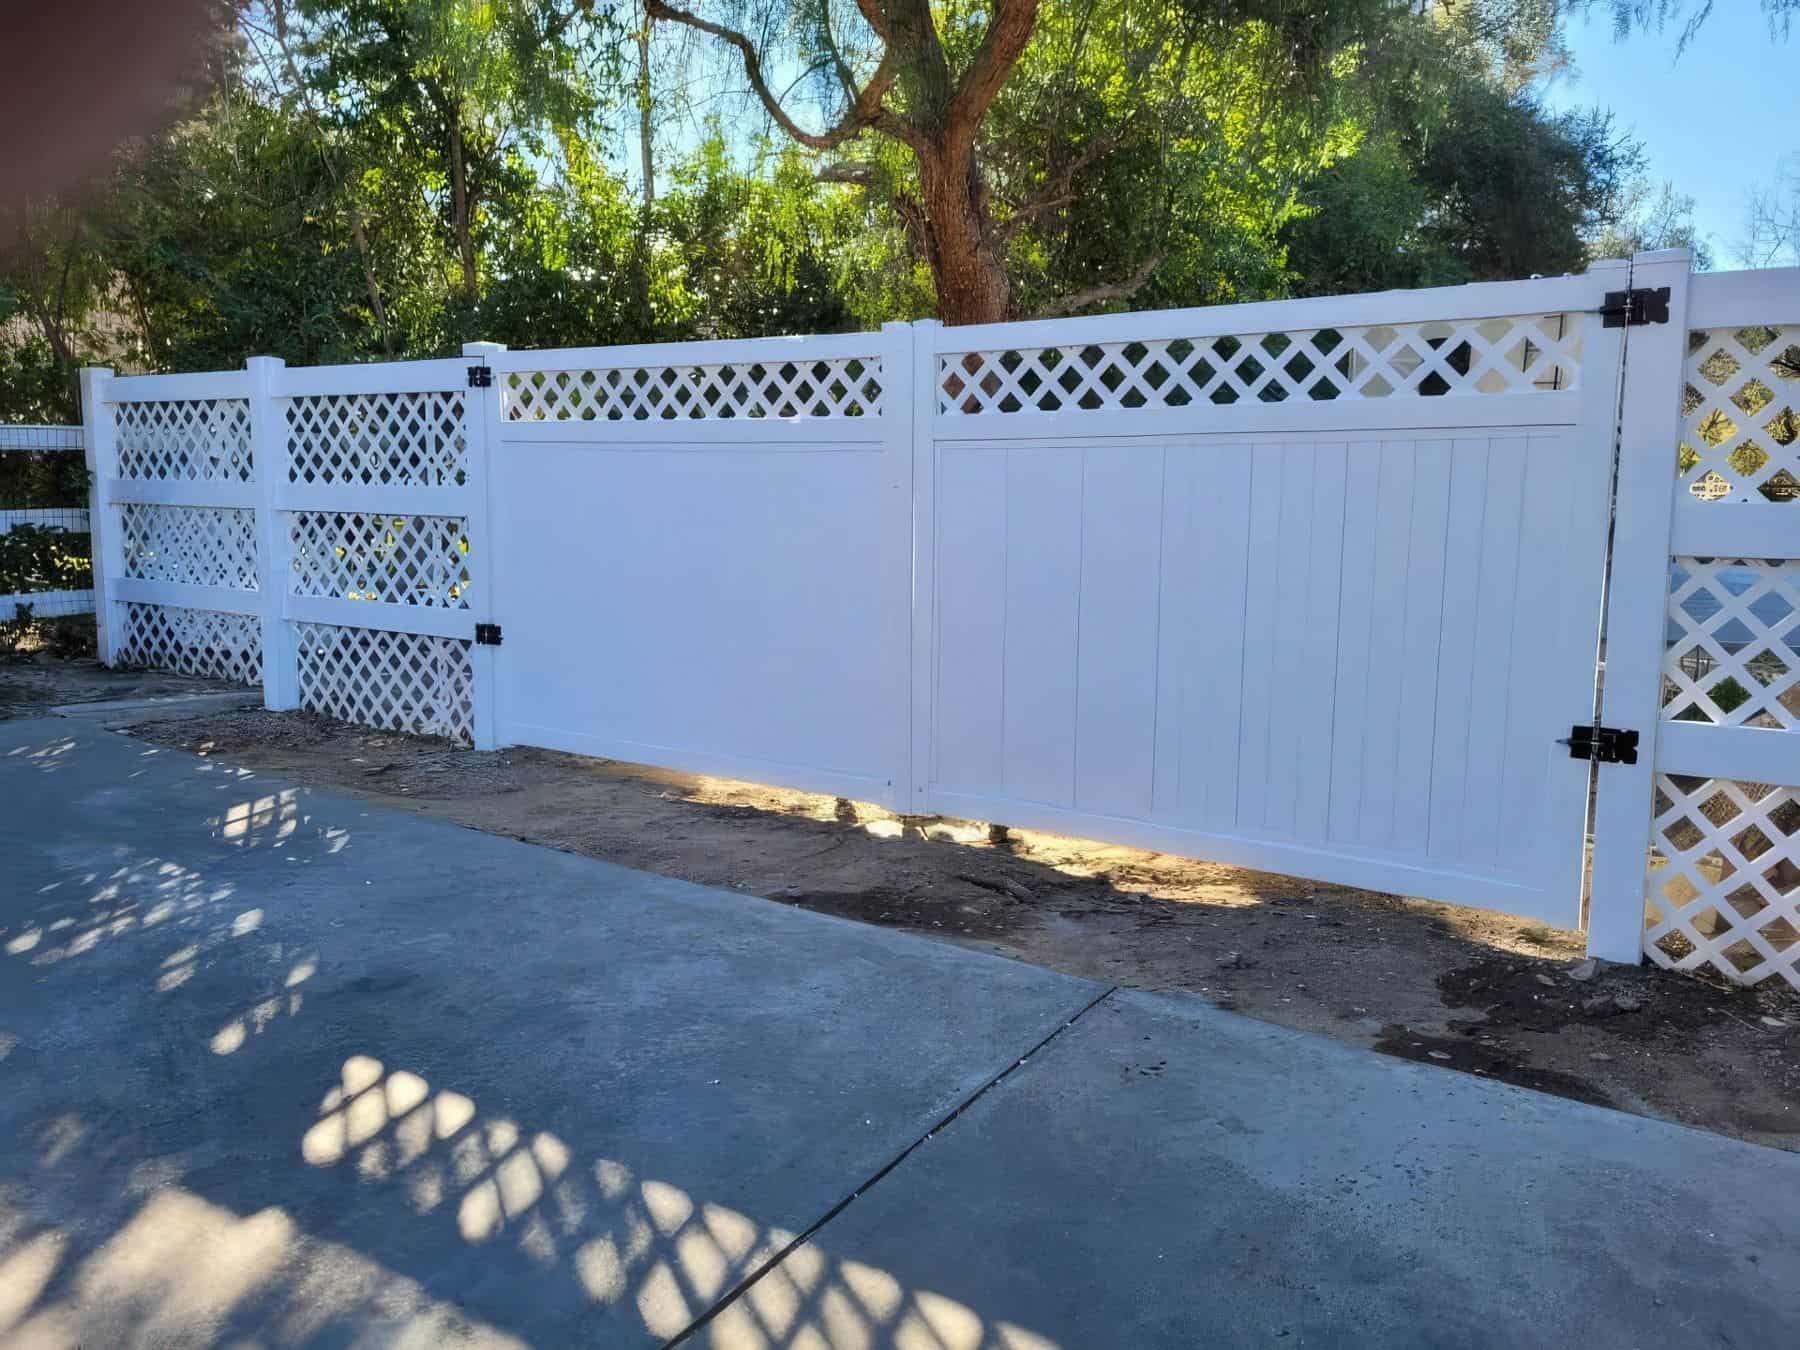 Vinyl driveway double gates with lattice fence beside leading into the suburban home with trees in the background